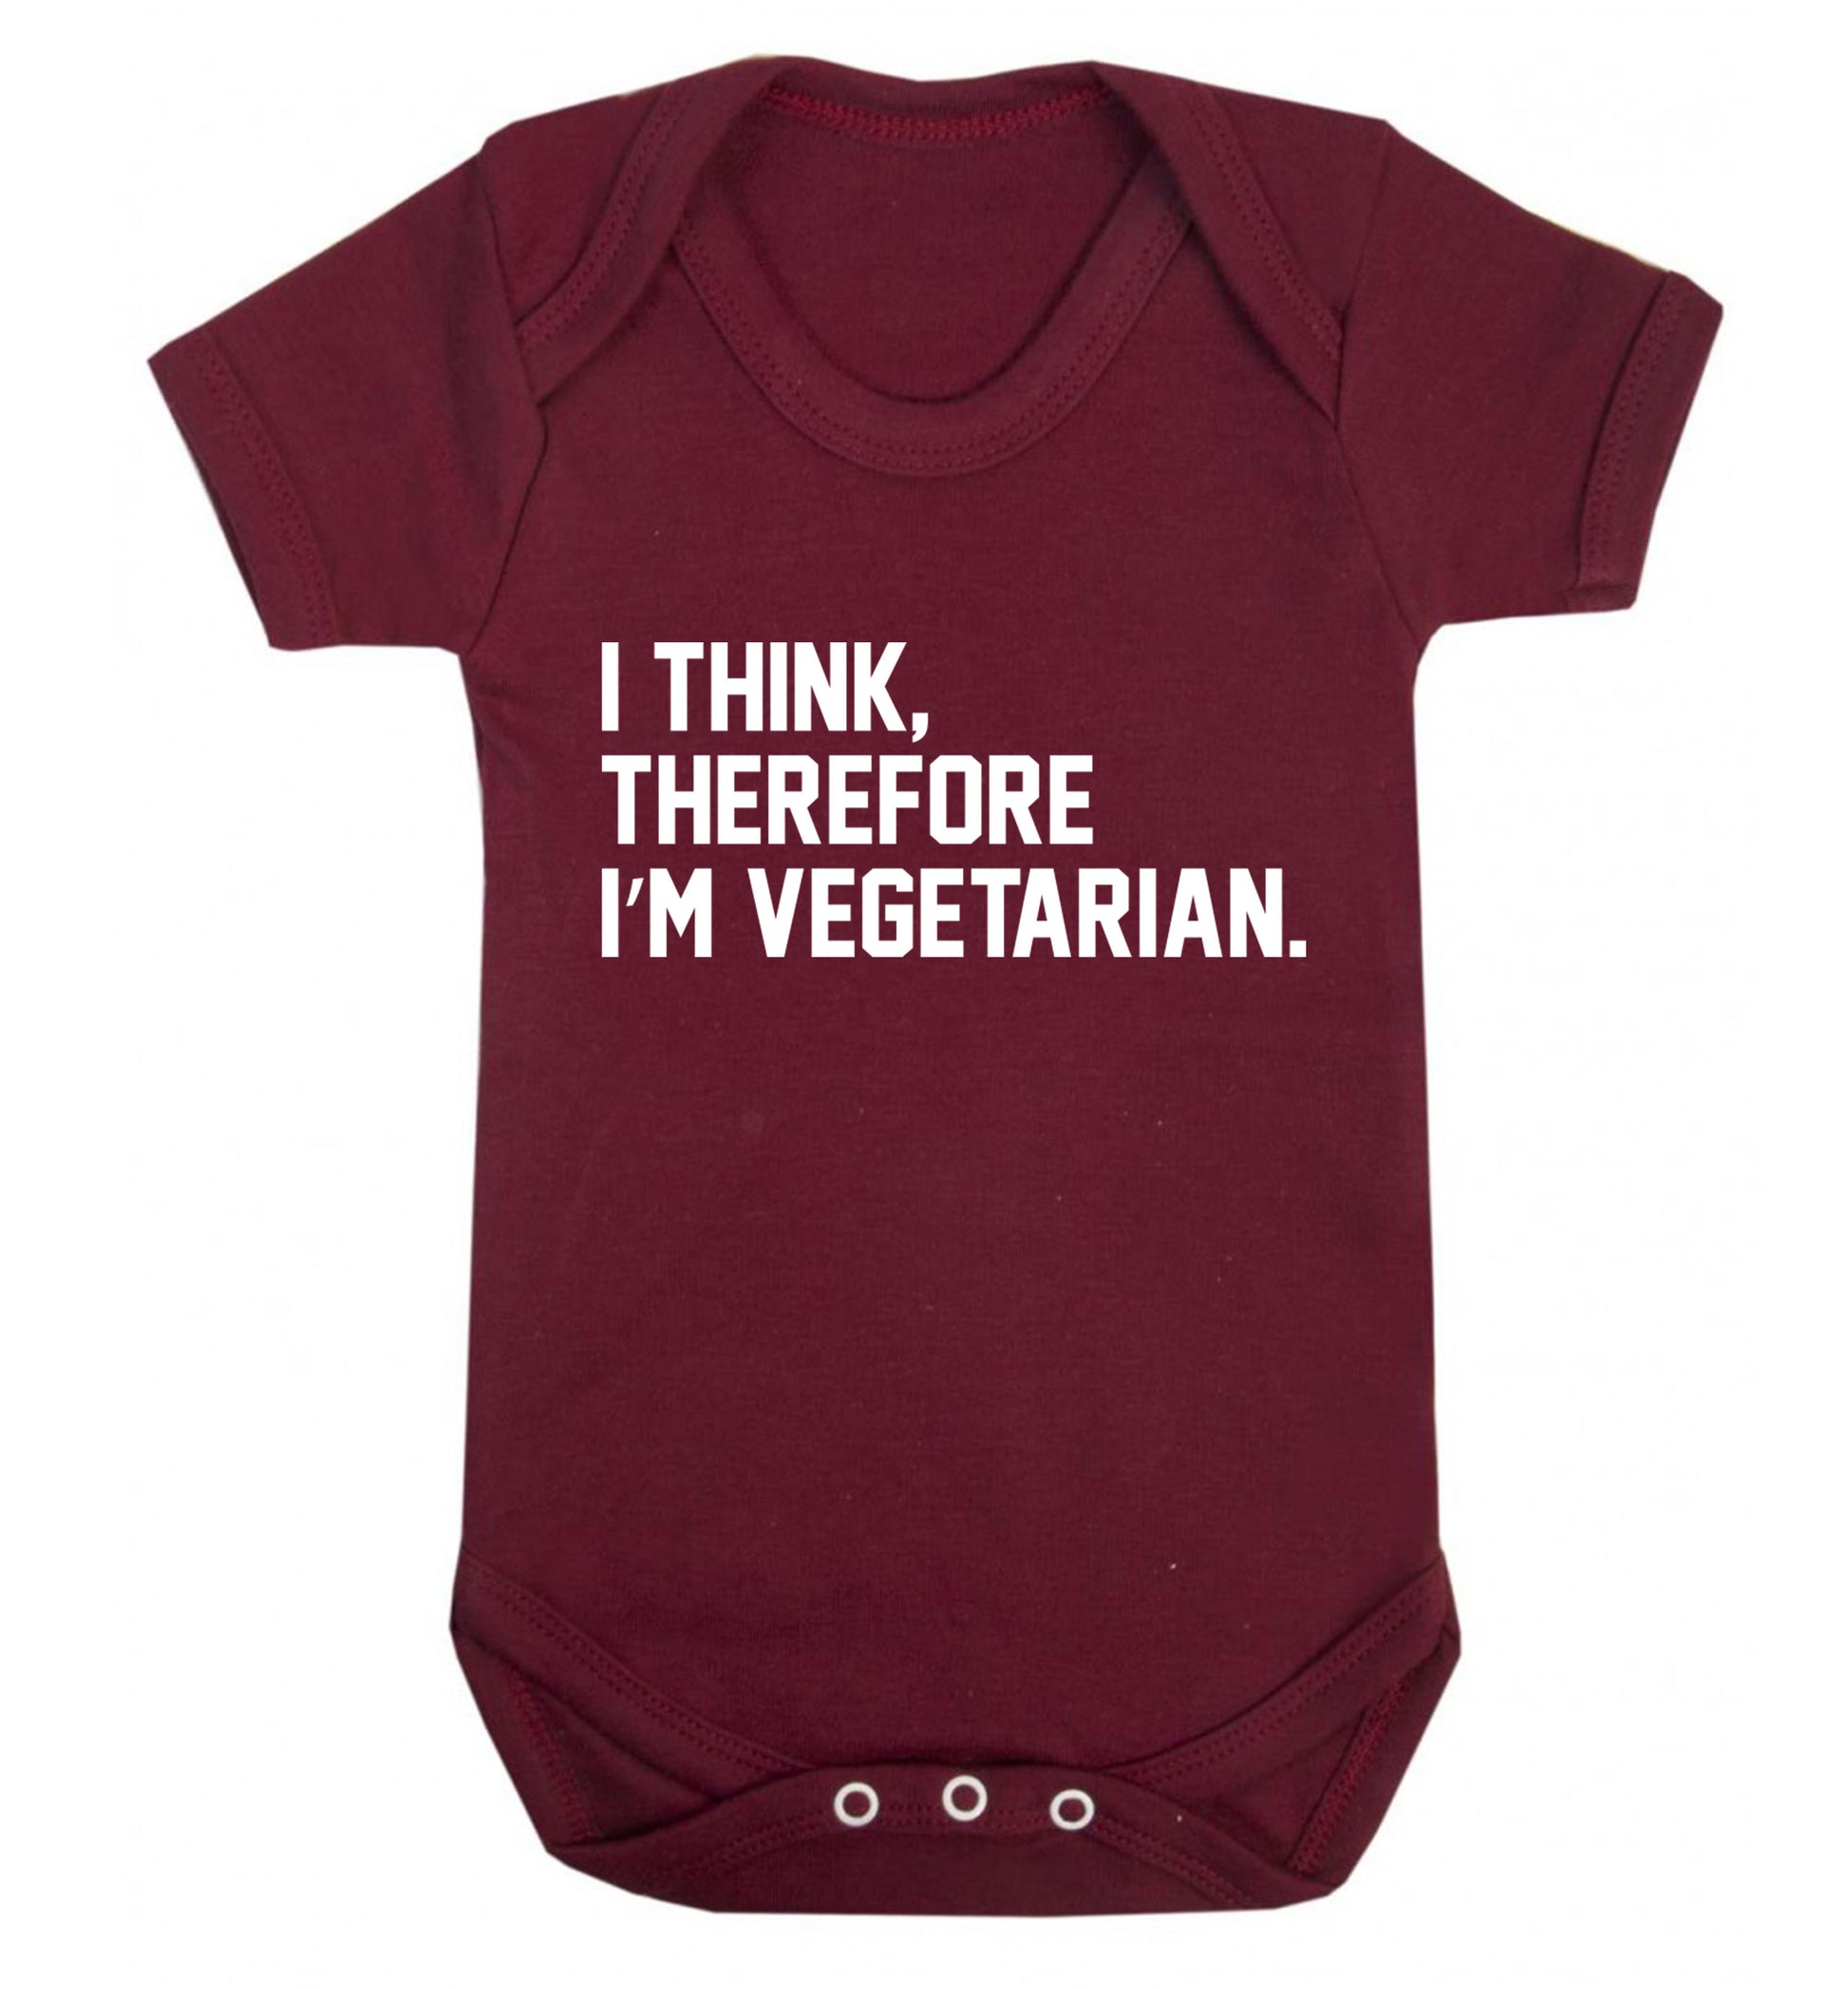 I think therefore I'm vegetarian Baby Vest maroon 18-24 months